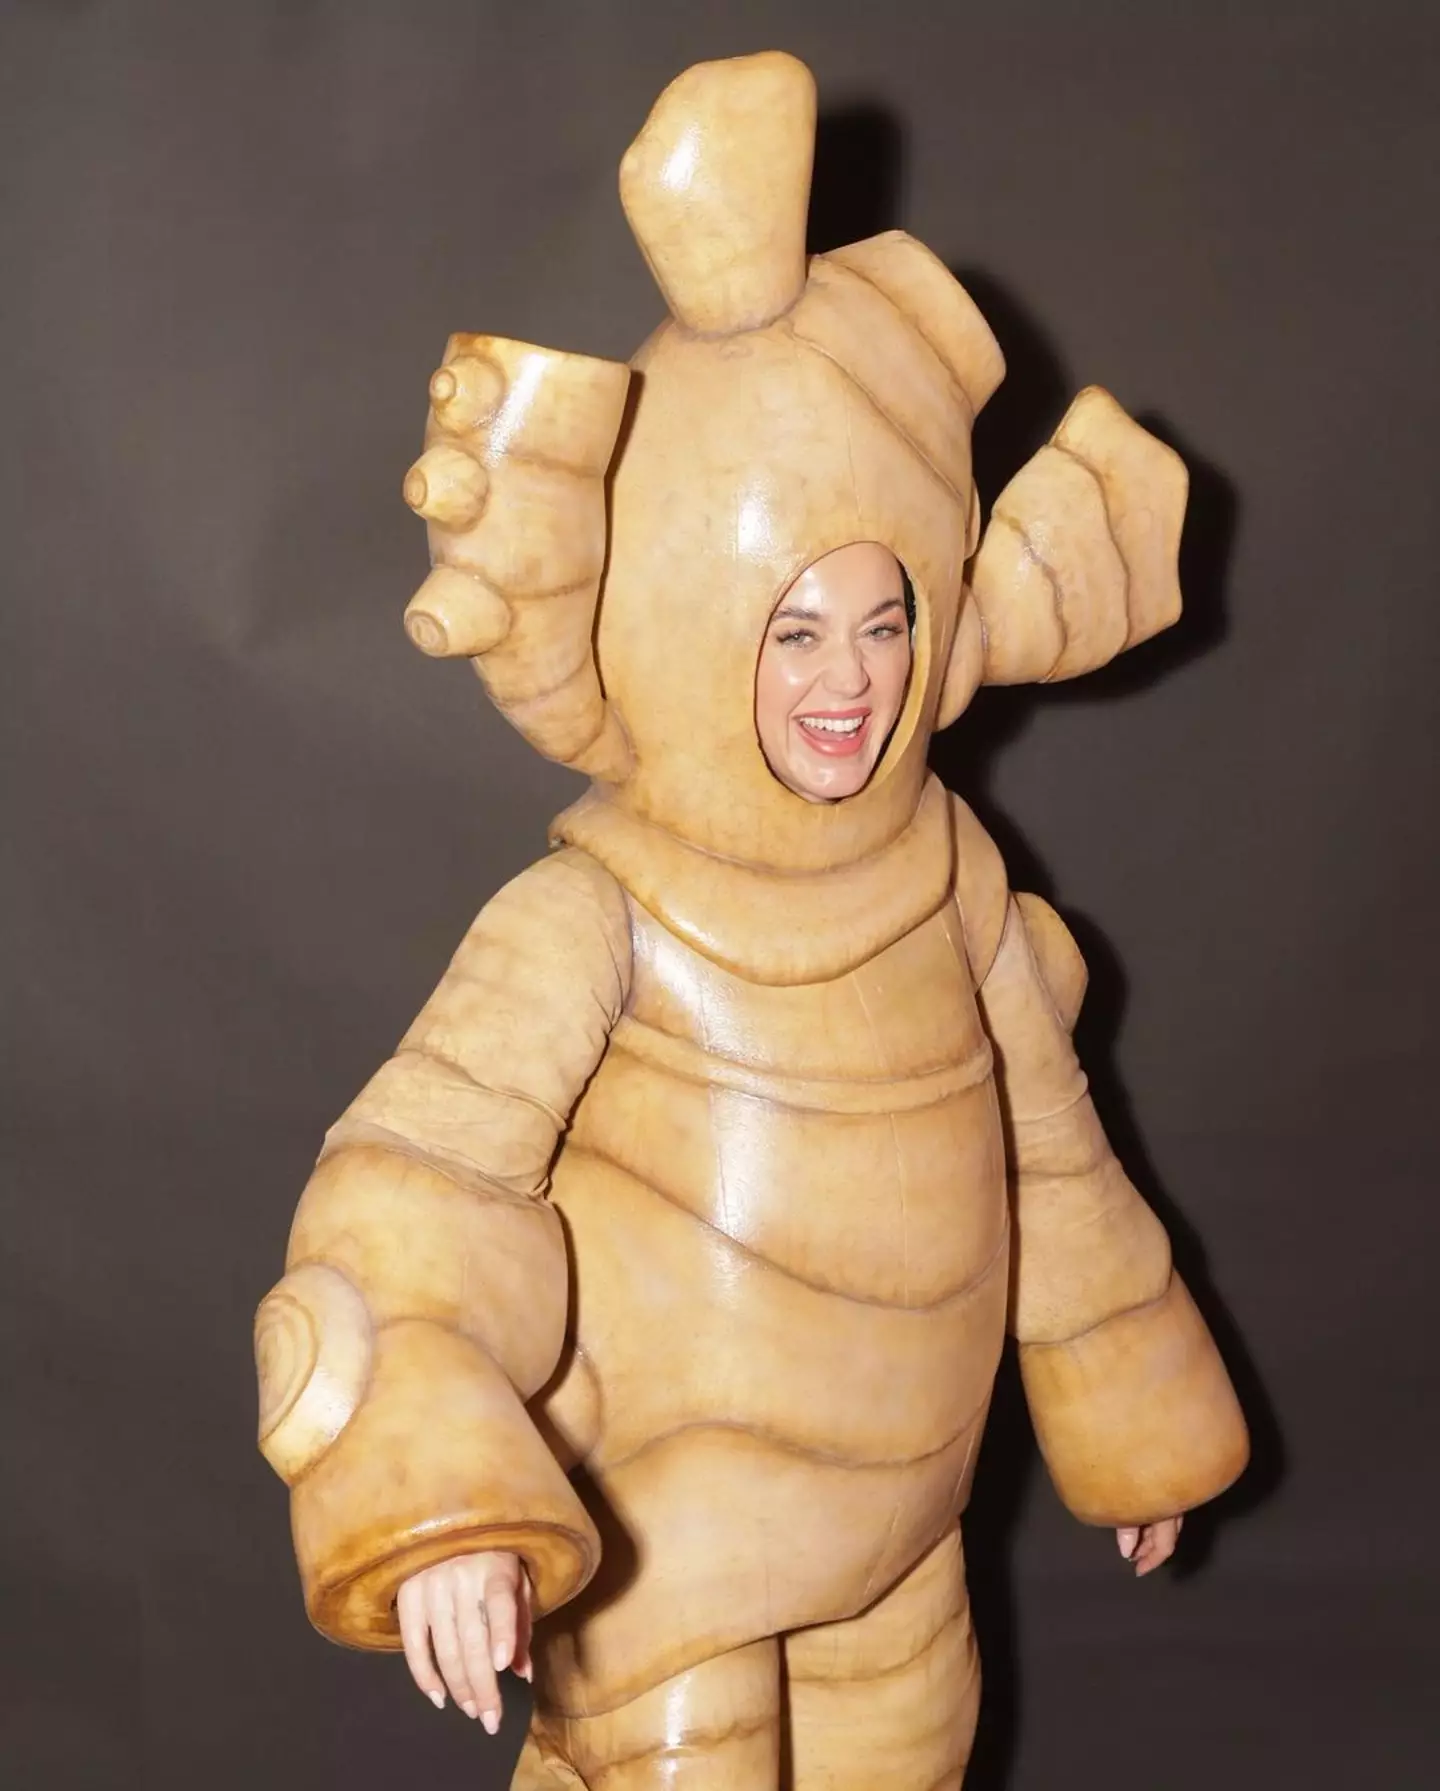 Katy Perry is all smiles dressed as a ginger root.